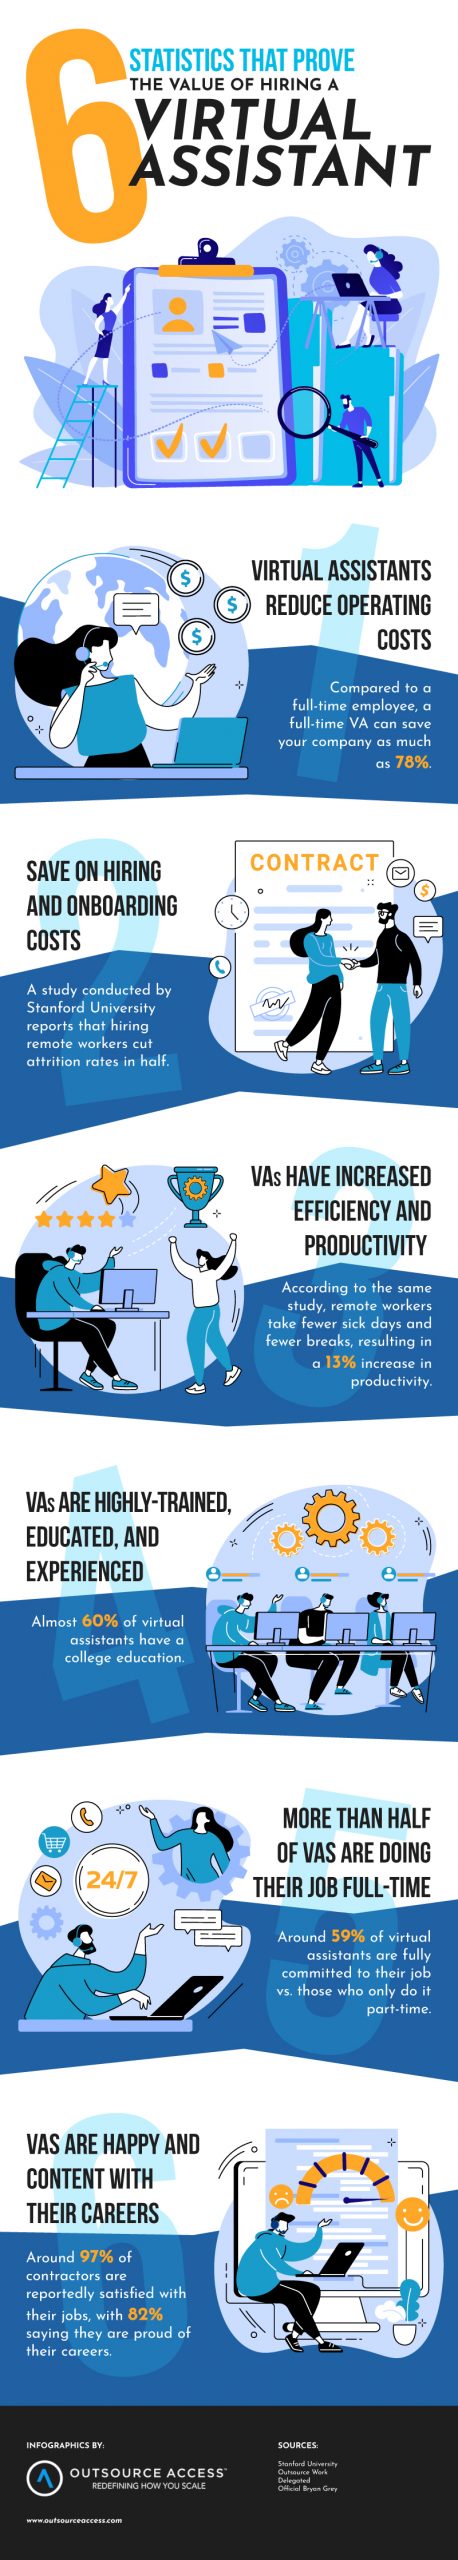 statistics that prove the value of hiring a virtual assistant infographic